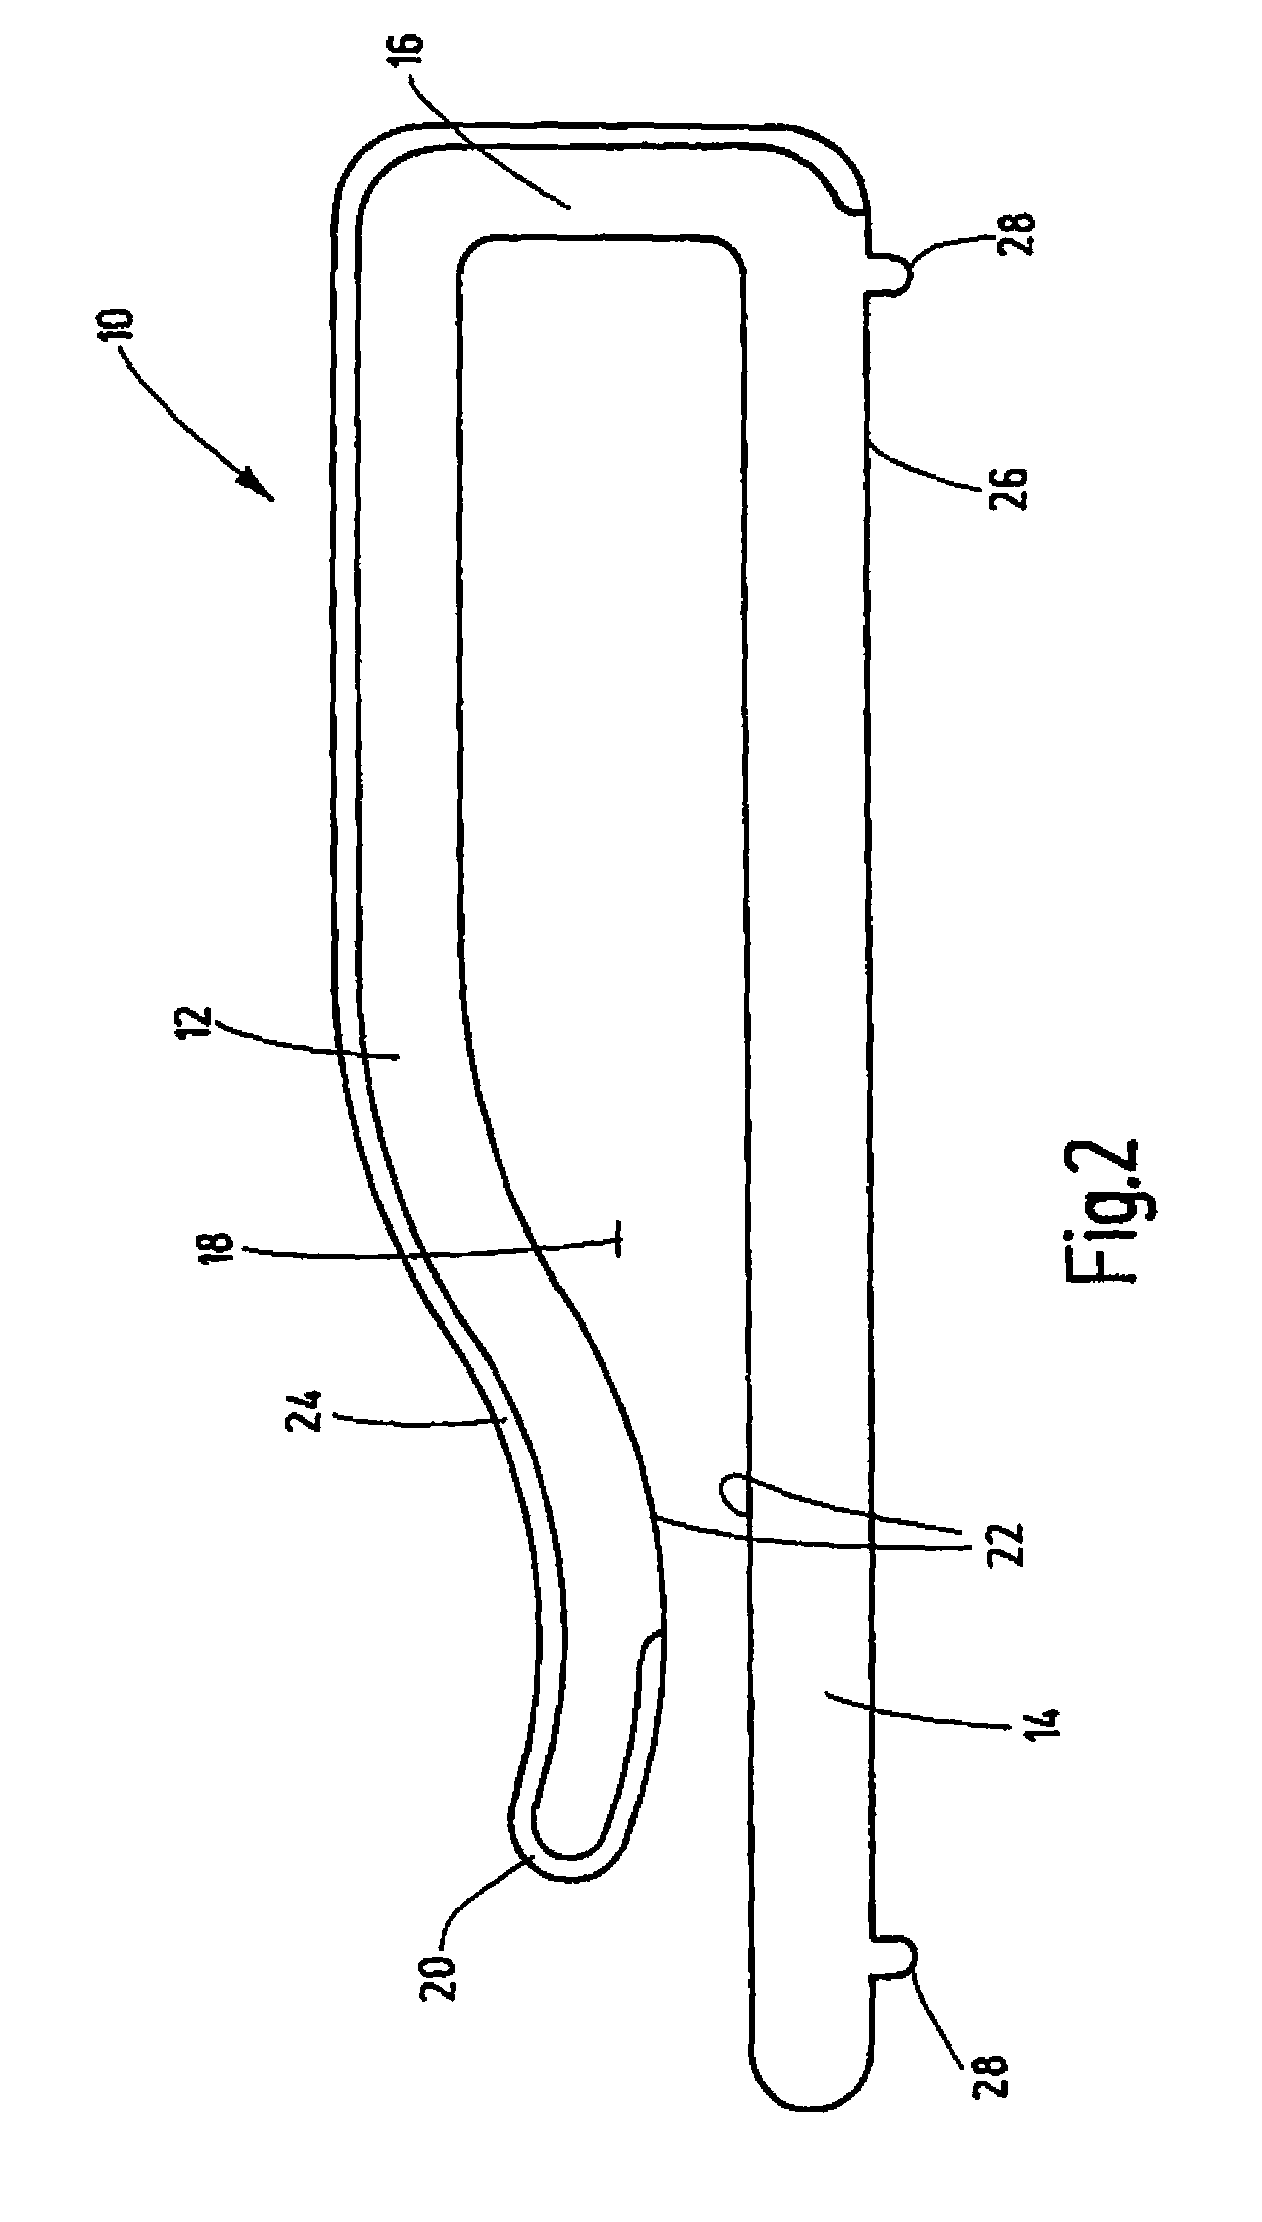 Panel arrangement with clamping clip